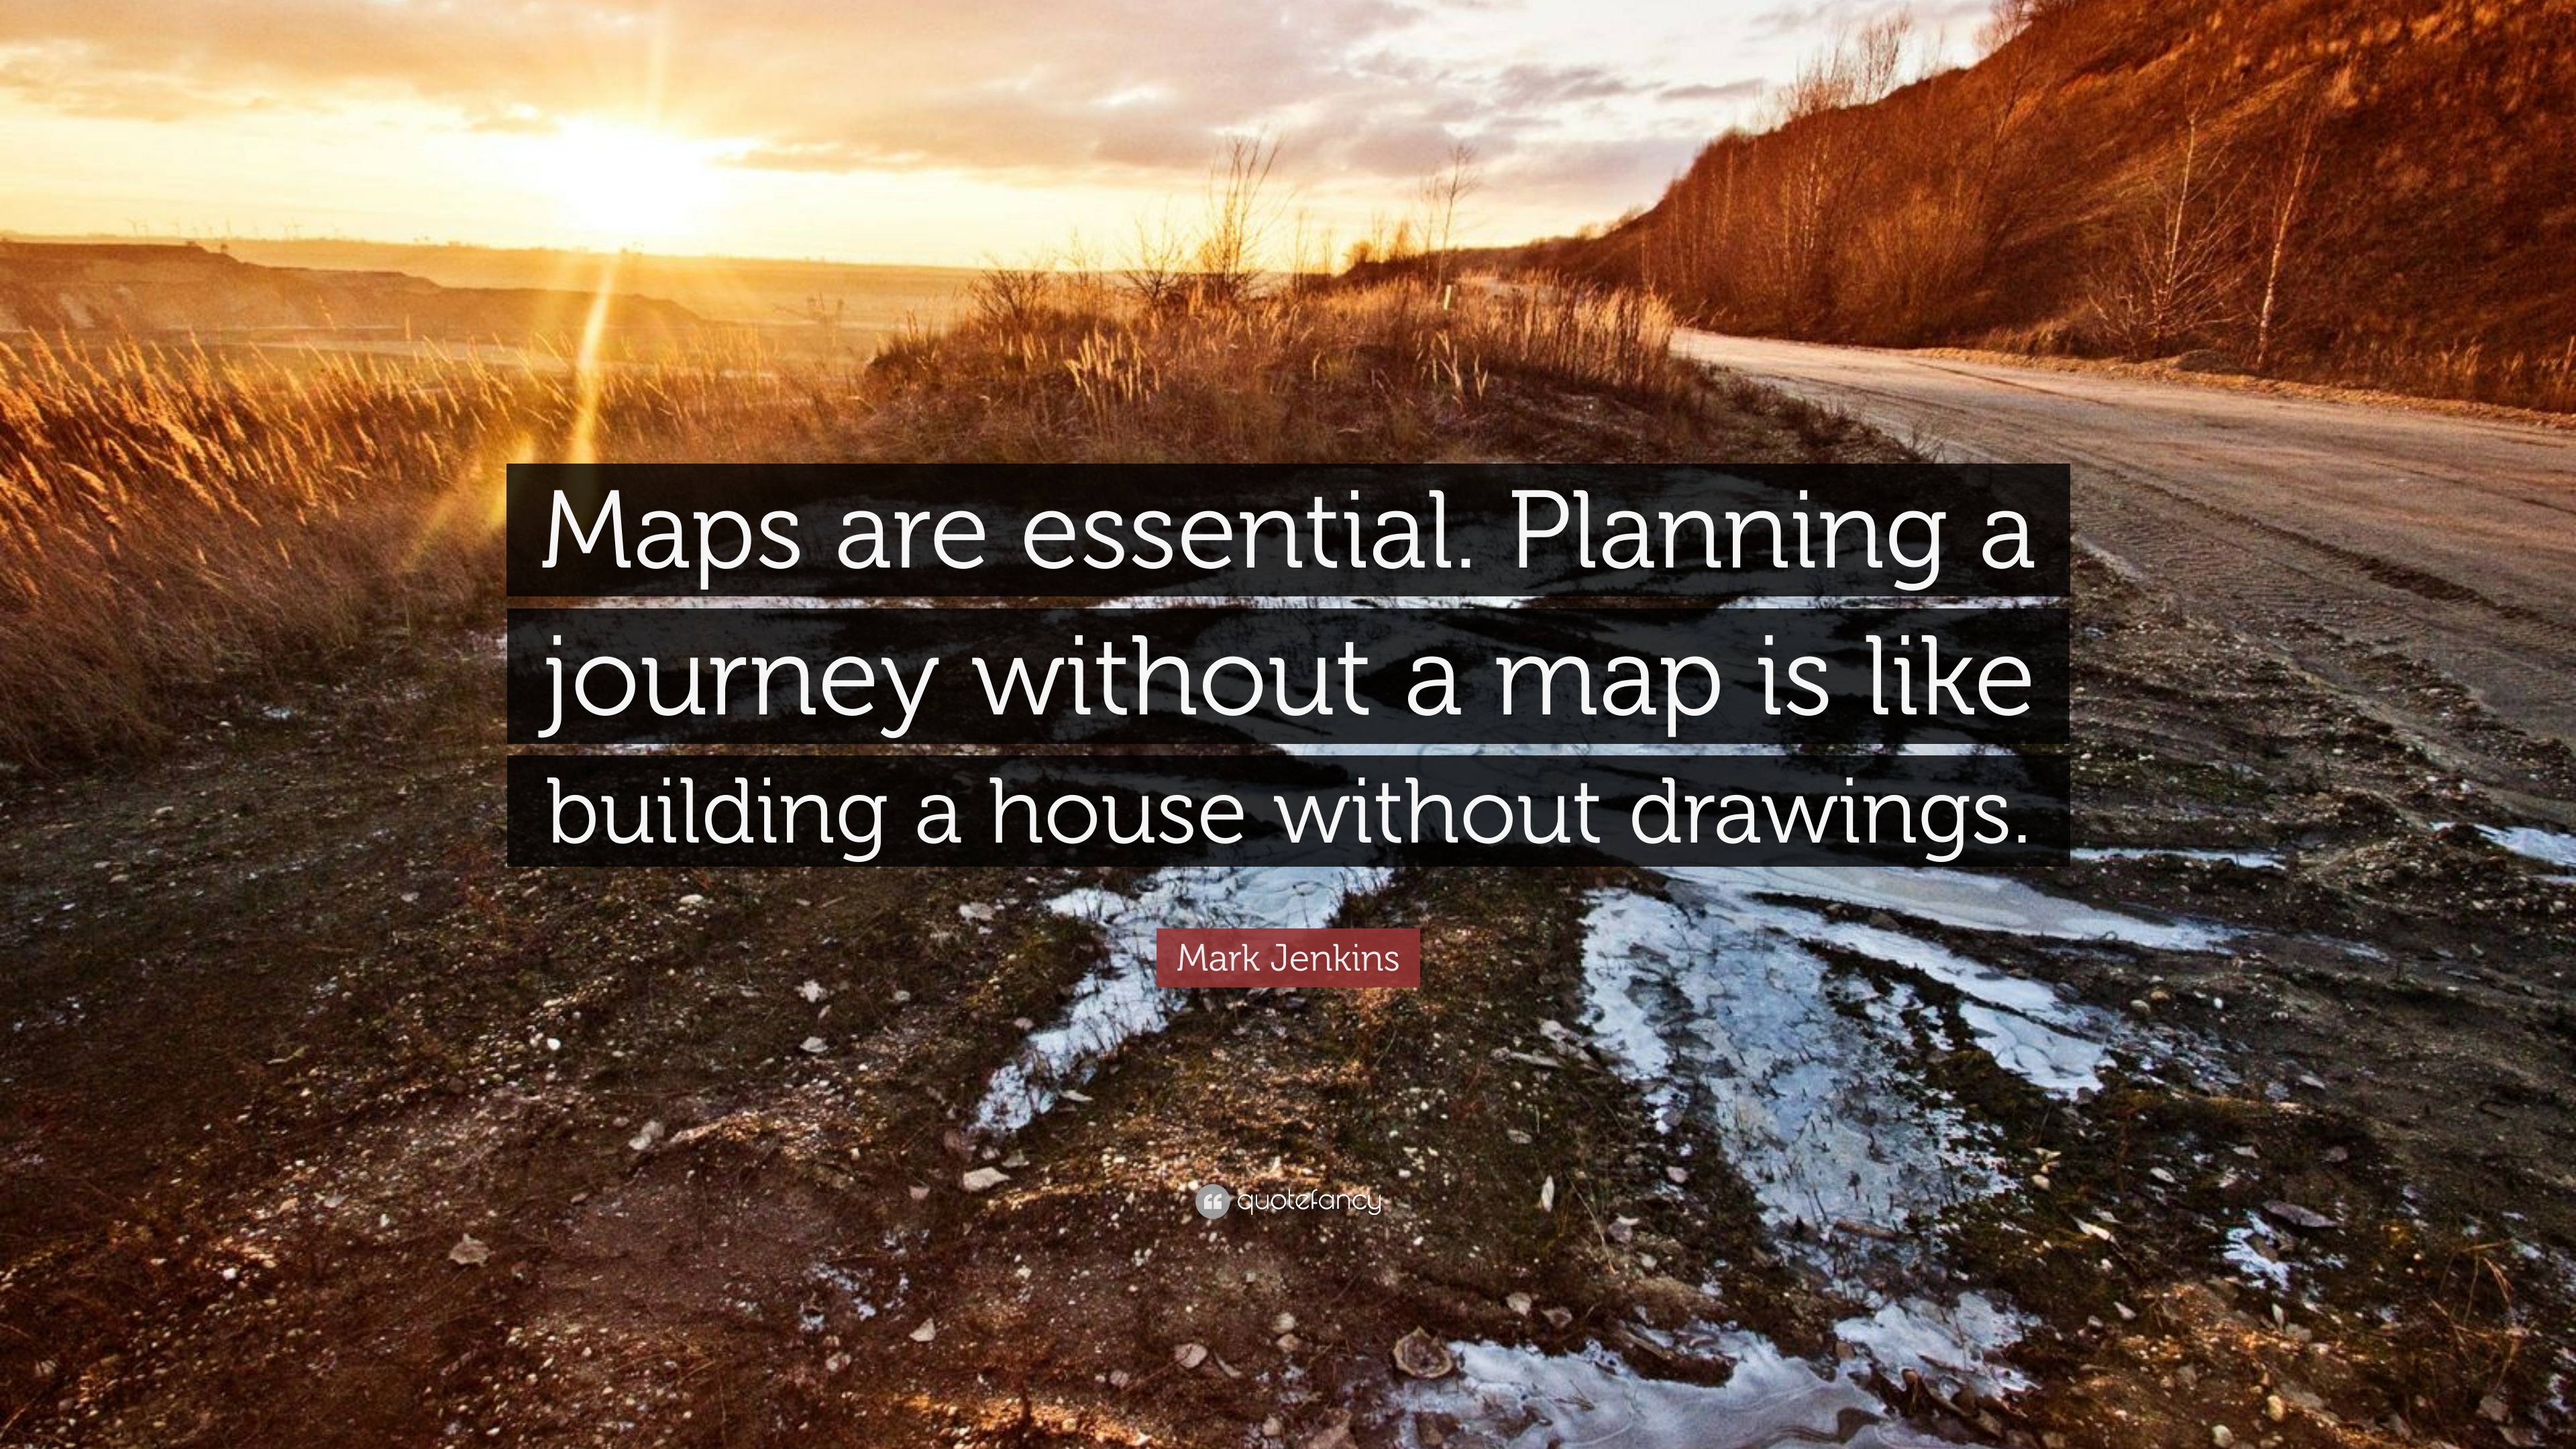 Mark Jenkins Quote: “Maps are essential. Planning a journey